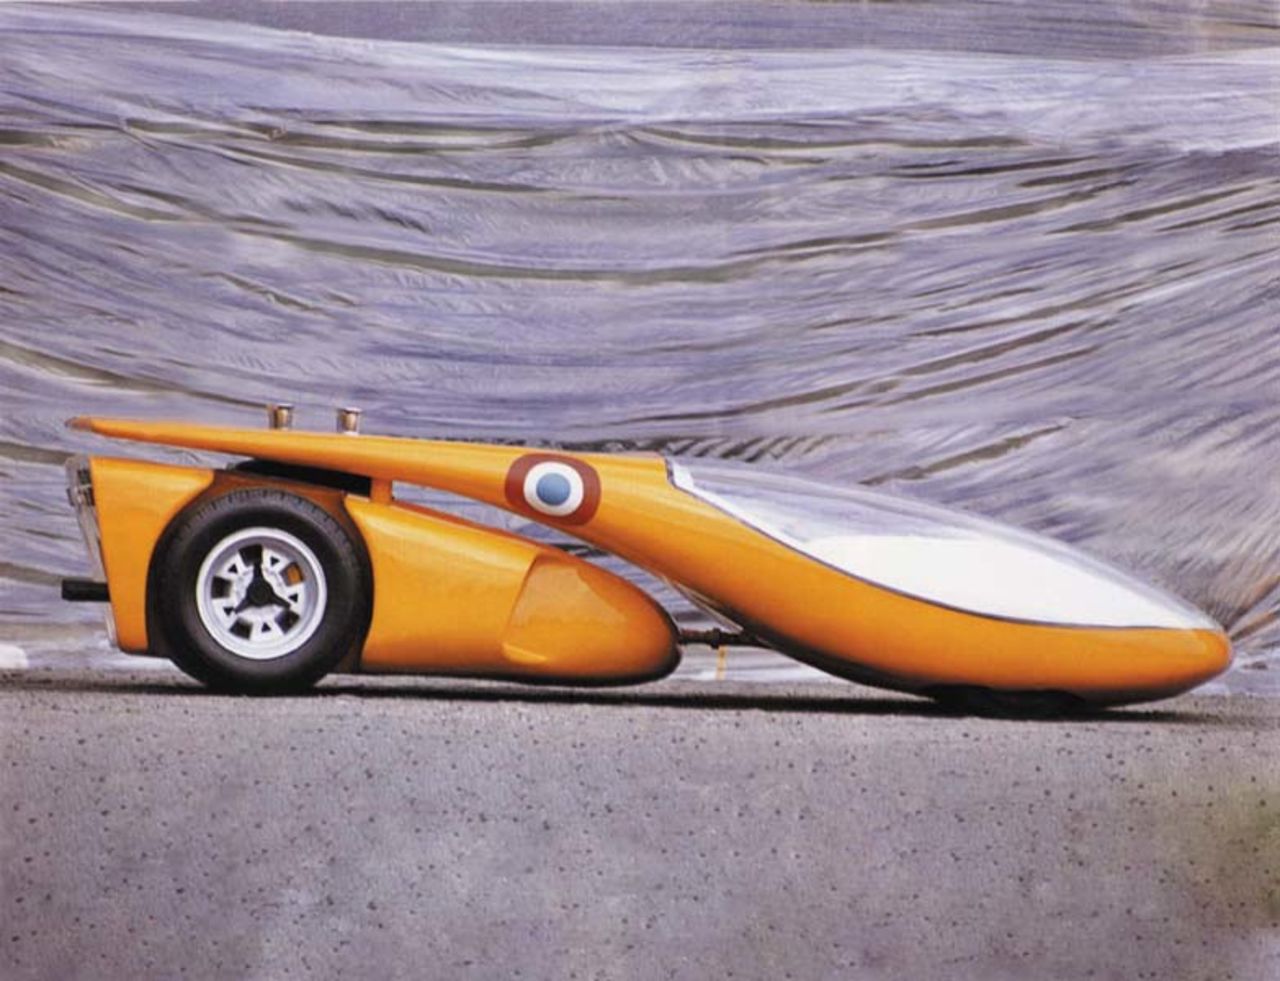 Life-sized model of a two-part hybrid car, 1970. The engine and cam shaft are taken from a Lamborghini Miura. The separate passenger cabin is designed like the cockpit of a glider.